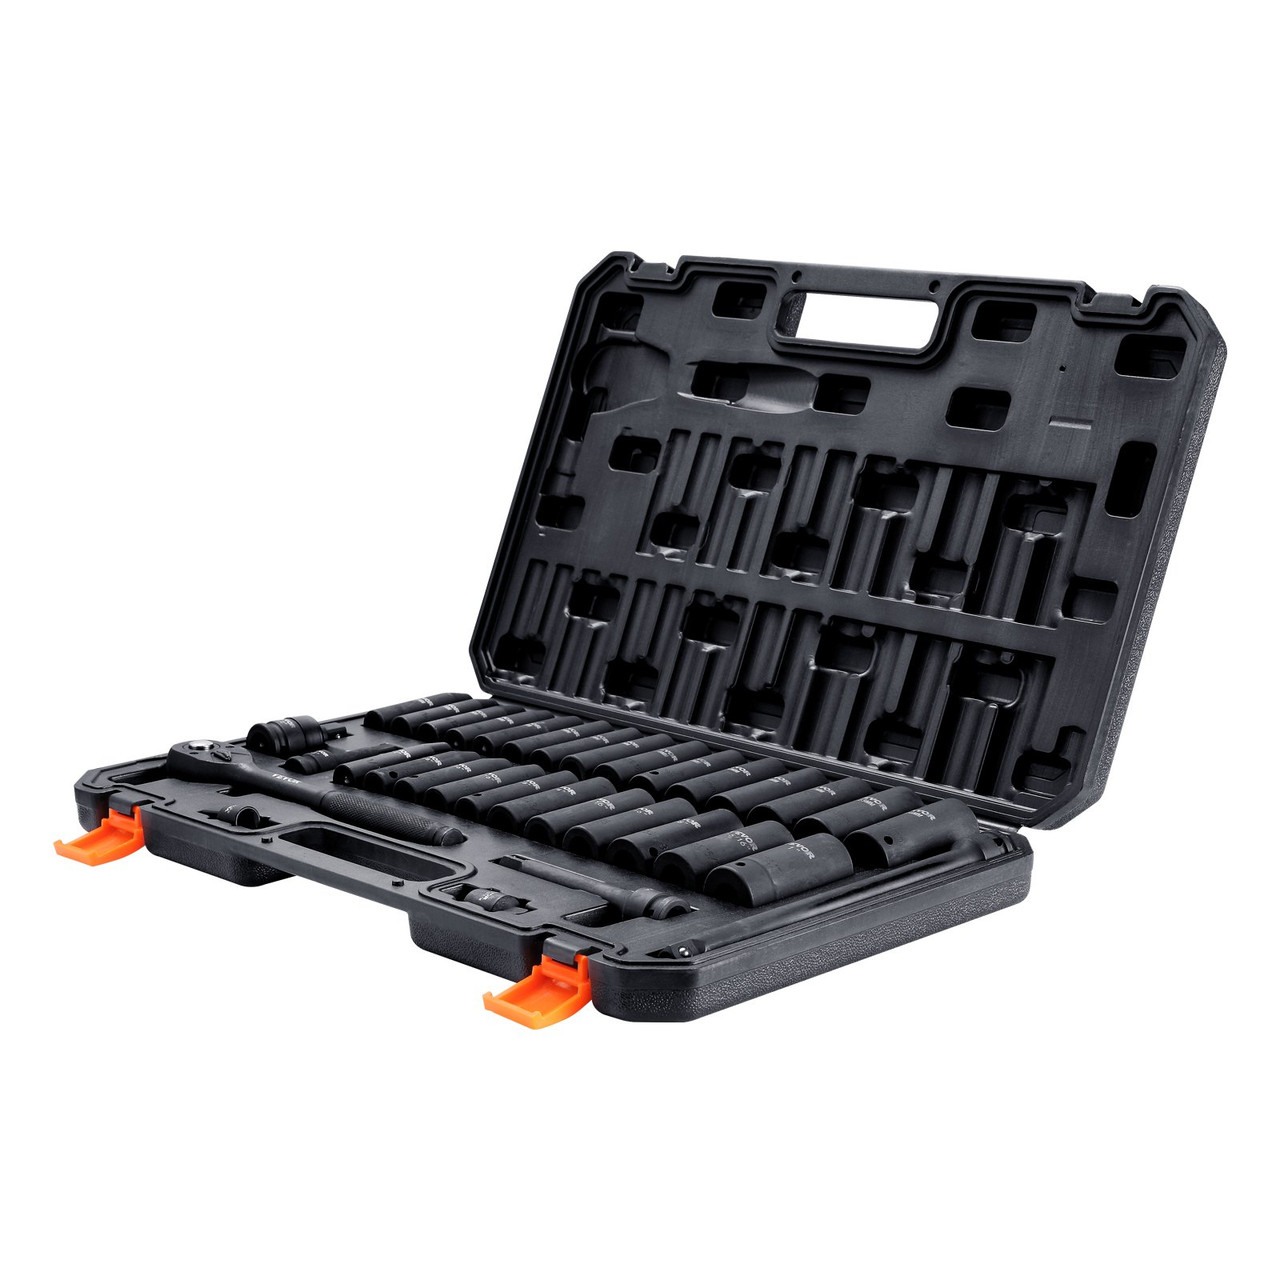 1/2" Drive Impact Socket Set, 33 Piece Socket Set SAE 3/8"-1" and Metric 10-24mm, 6 Point Cr-V Alloy Steel for Auto Repair, Easy-to-Read Size Markings, Rugged Construction, Includes Storage Case